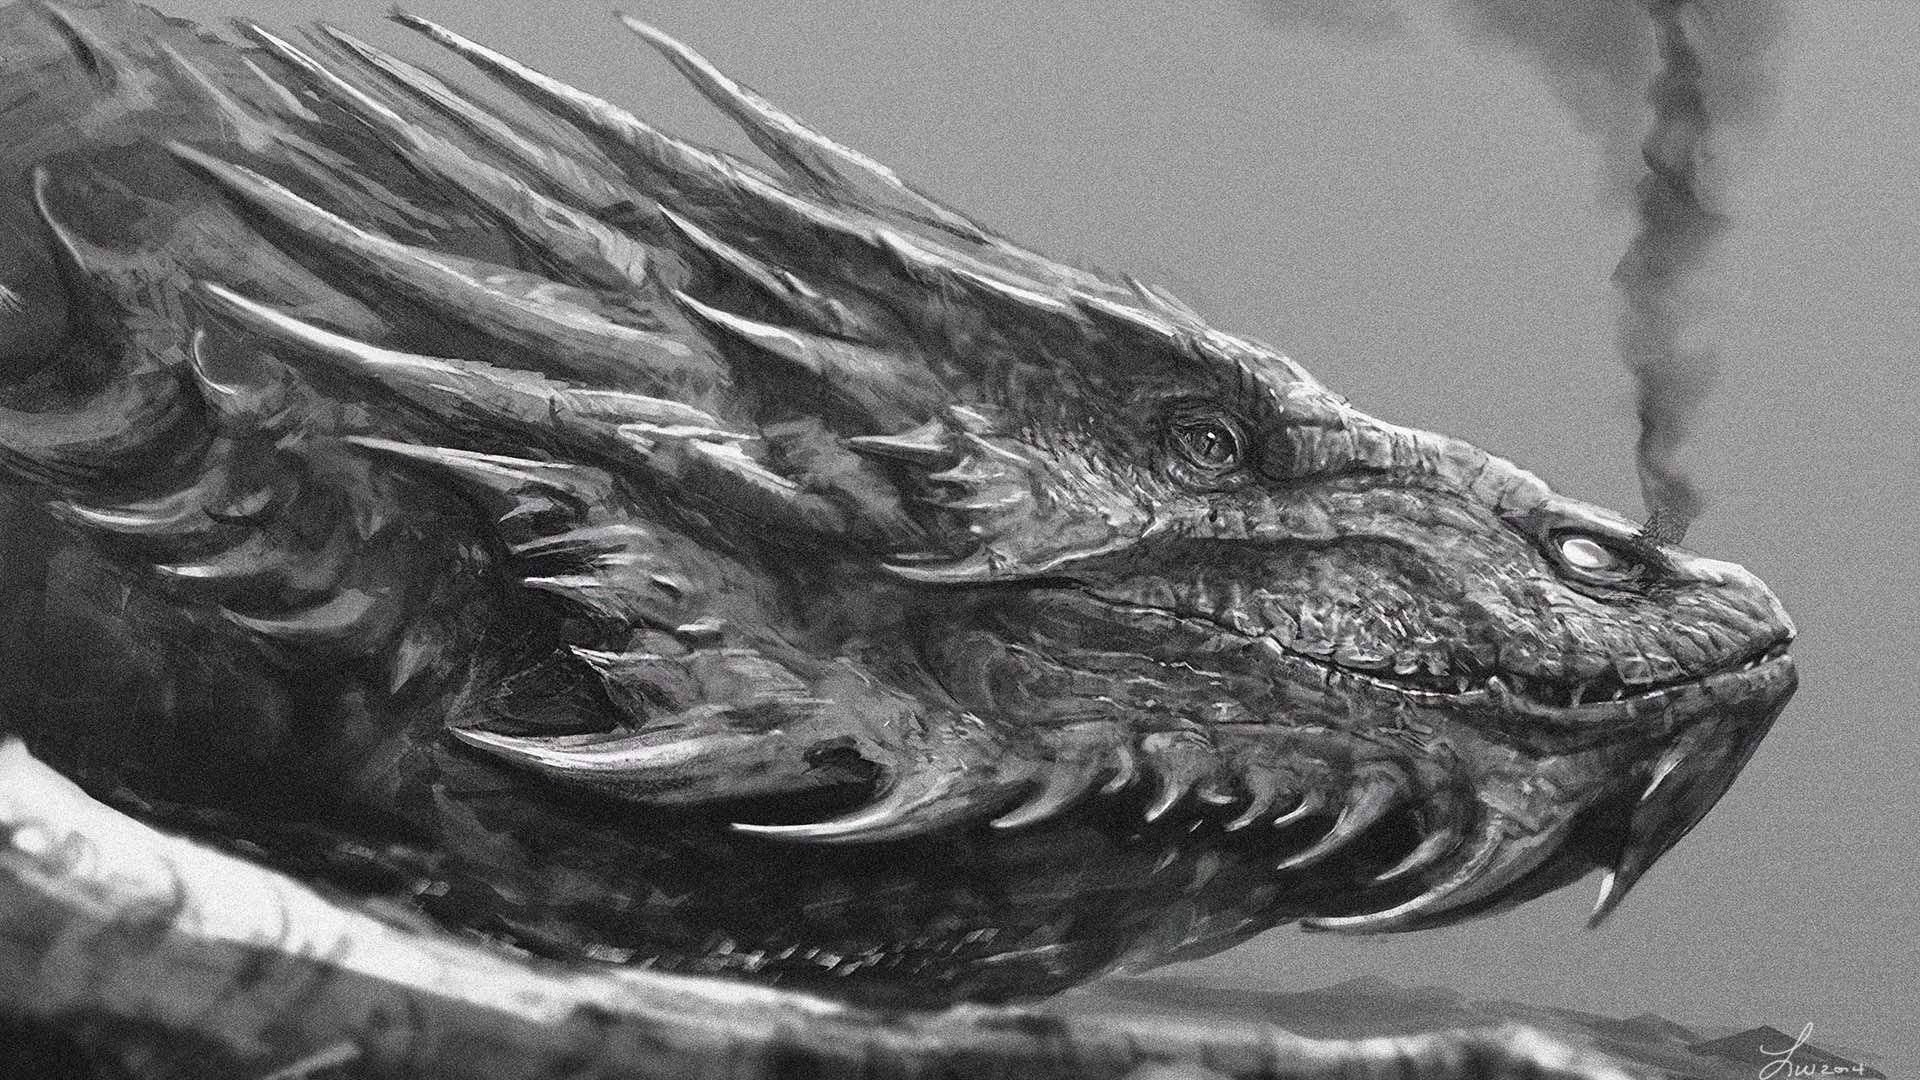 1920x1080 Smaug Wallpaper by TwoDD dragon The Hobbit Lord of the Rings J.R.R. Tolkien  monster beast creature